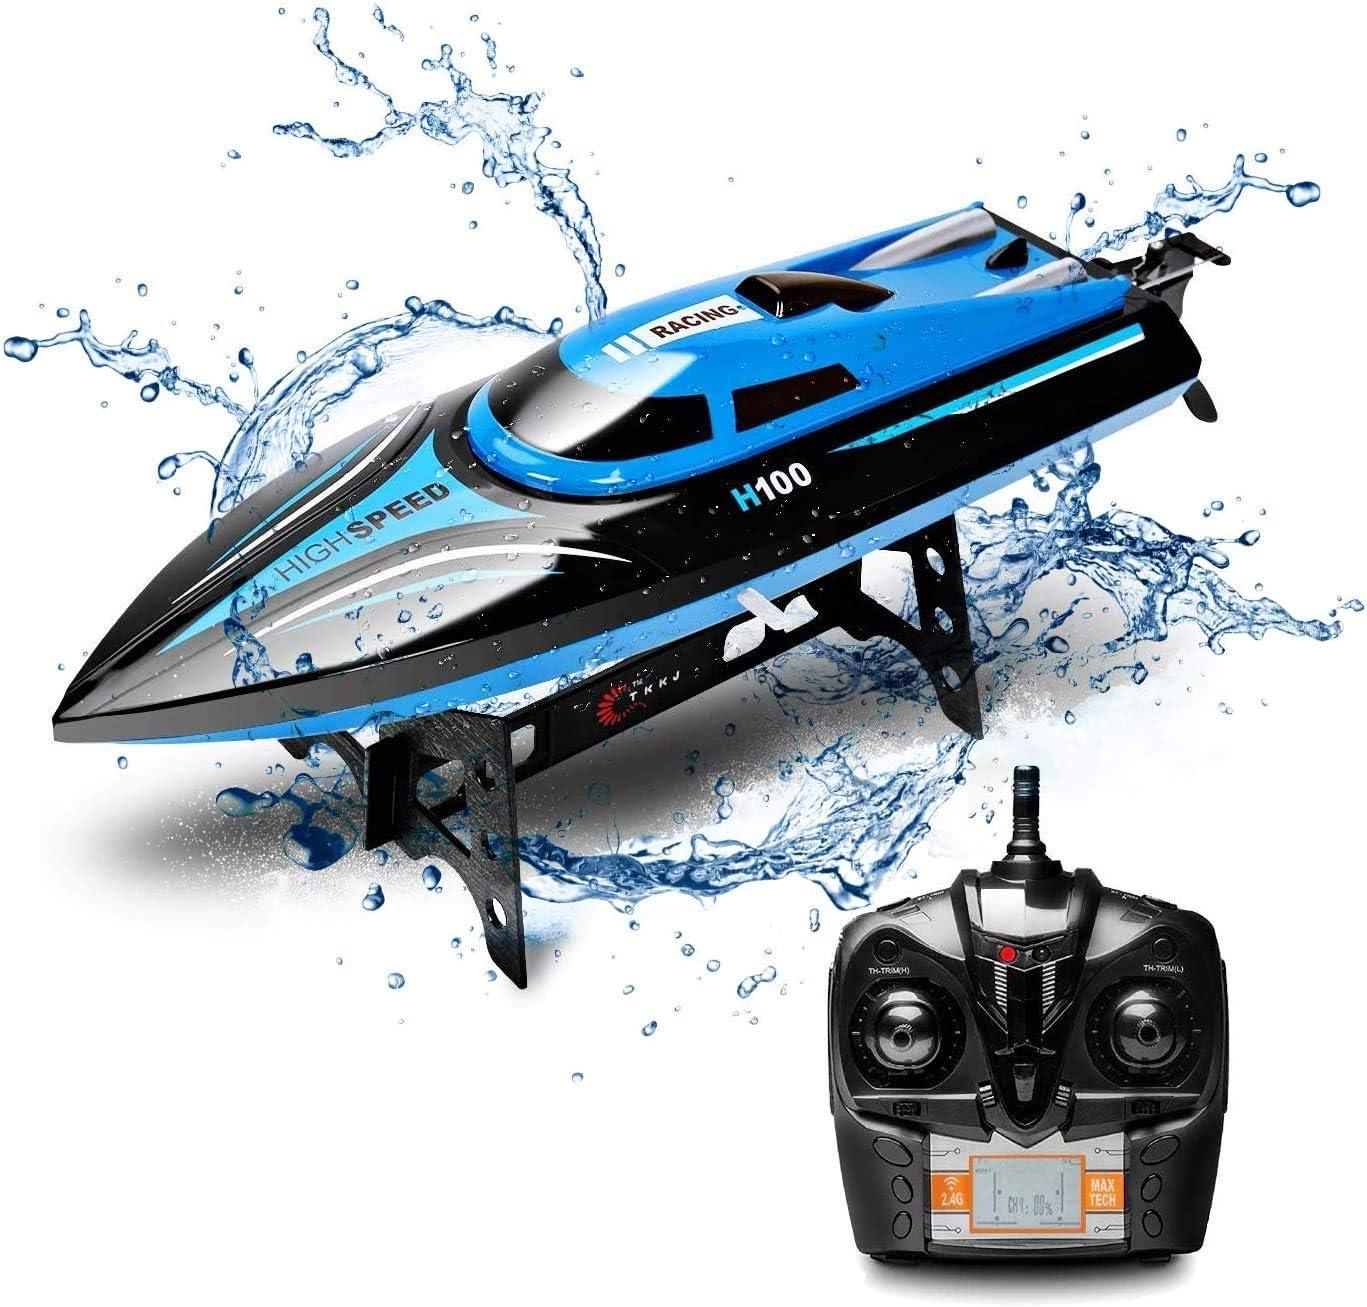 2.4 Ghz Speed Boat: Top Recommended 2.4 GHz Speed Boats